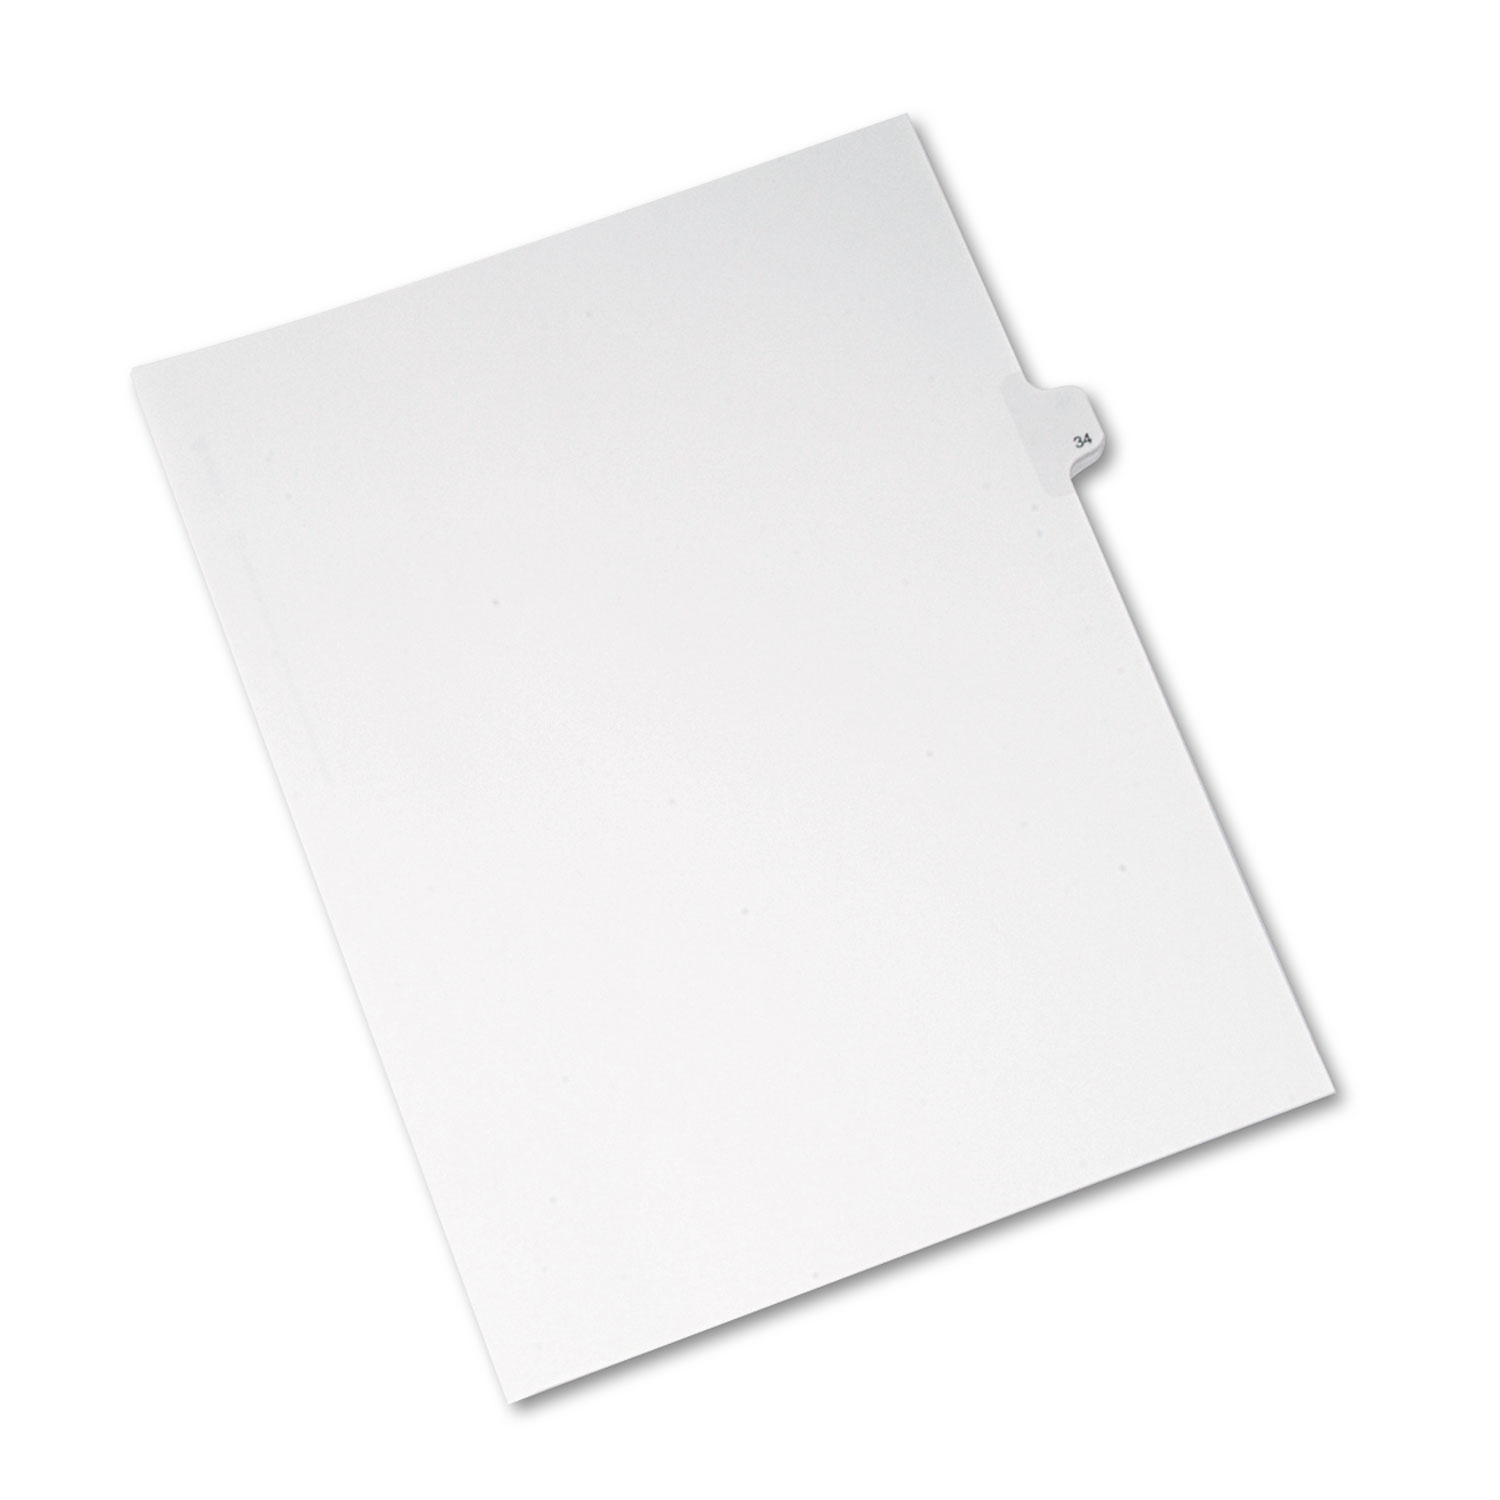 Allstate-Style Legal Exhibit Side Tab Divider, Title: 34, Letter, White, 25/Pack